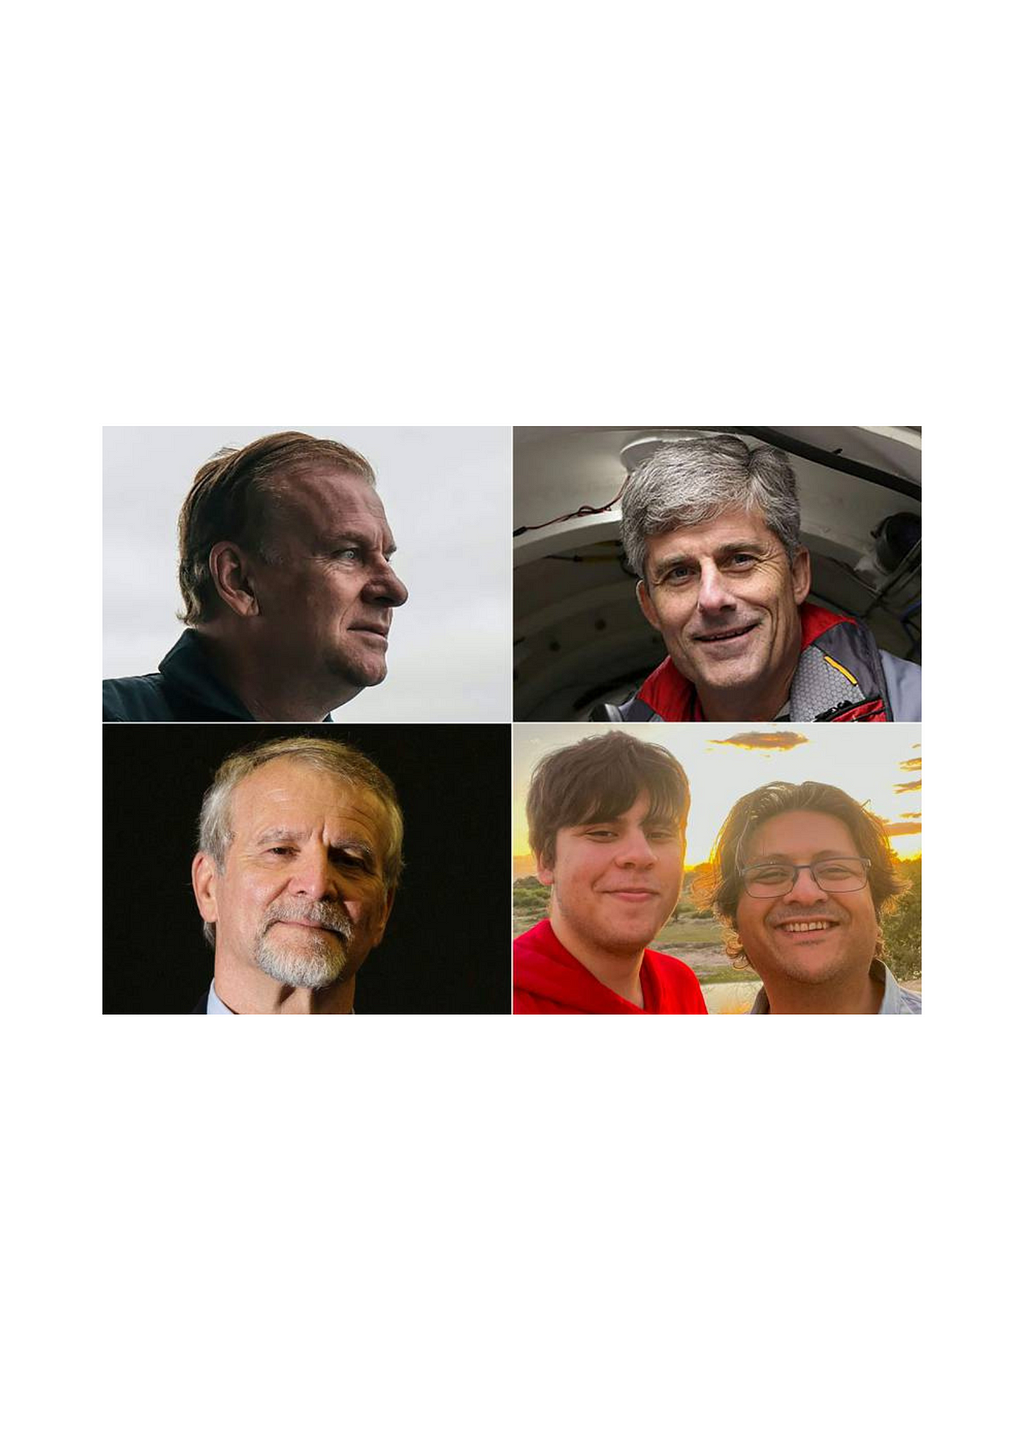 Titan passengers (clockwise from top left) Hamish Harding, Stockton Rush, Shahzada Dawood and his son Suleman, and Paul-Henry Nargeolet